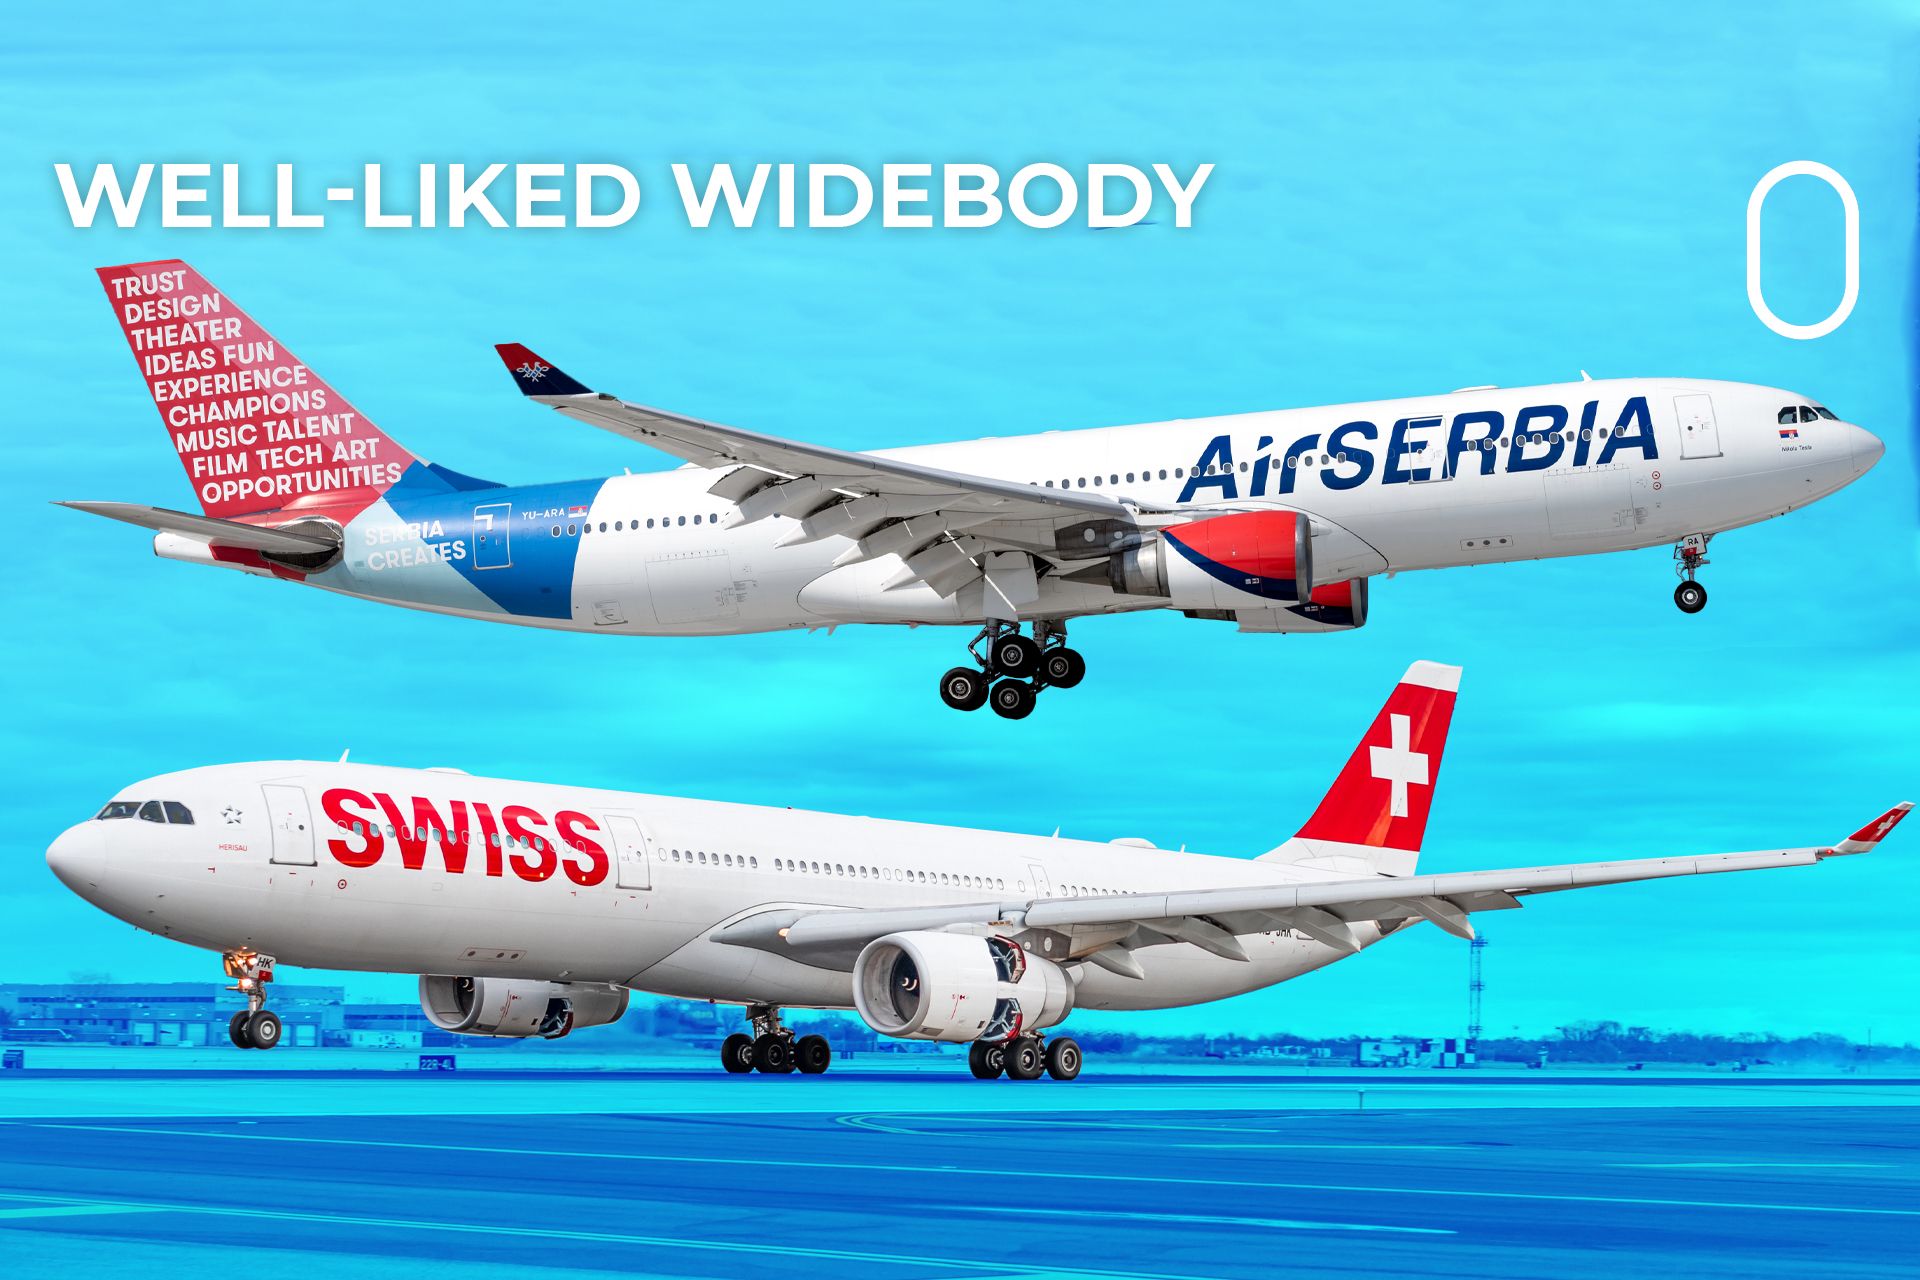 Why is the A330 so popular?